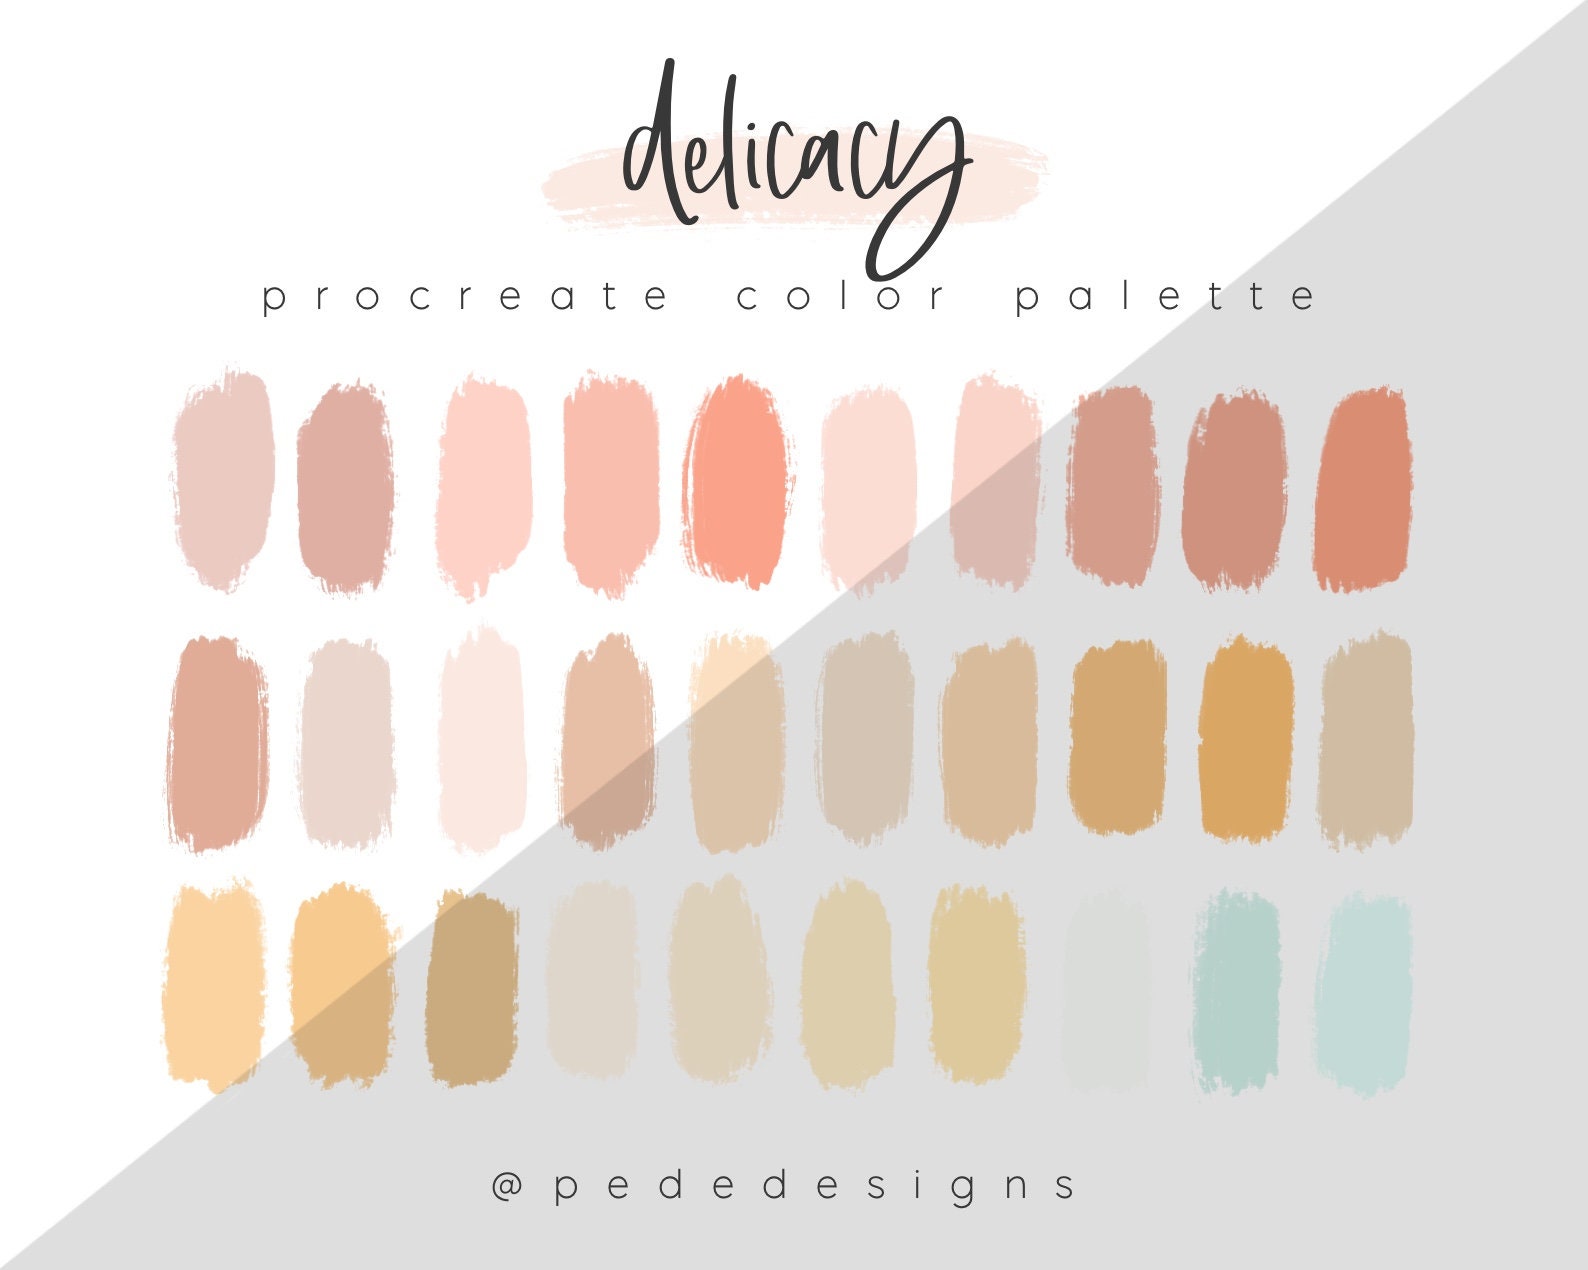 Delicacy Procreate Color Palette Color Swatches Ipad - Etsy